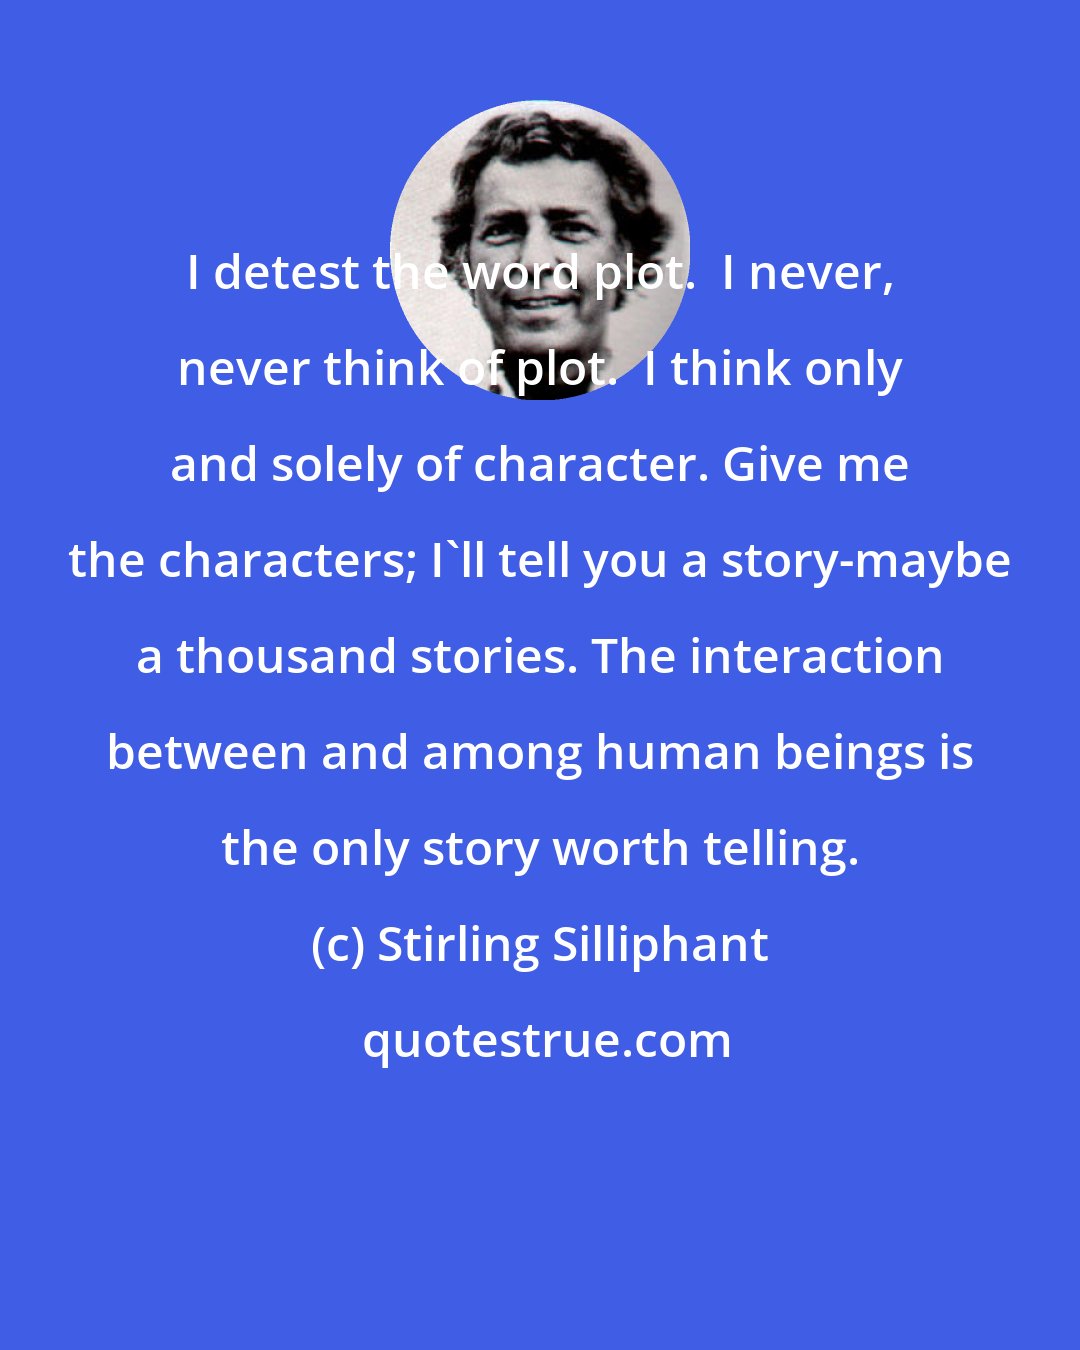 Stirling Silliphant: I detest the word plot.  I never, never think of plot.  I think only and solely of character. Give me the characters; I'll tell you a story-maybe a thousand stories. The interaction between and among human beings is the only story worth telling.